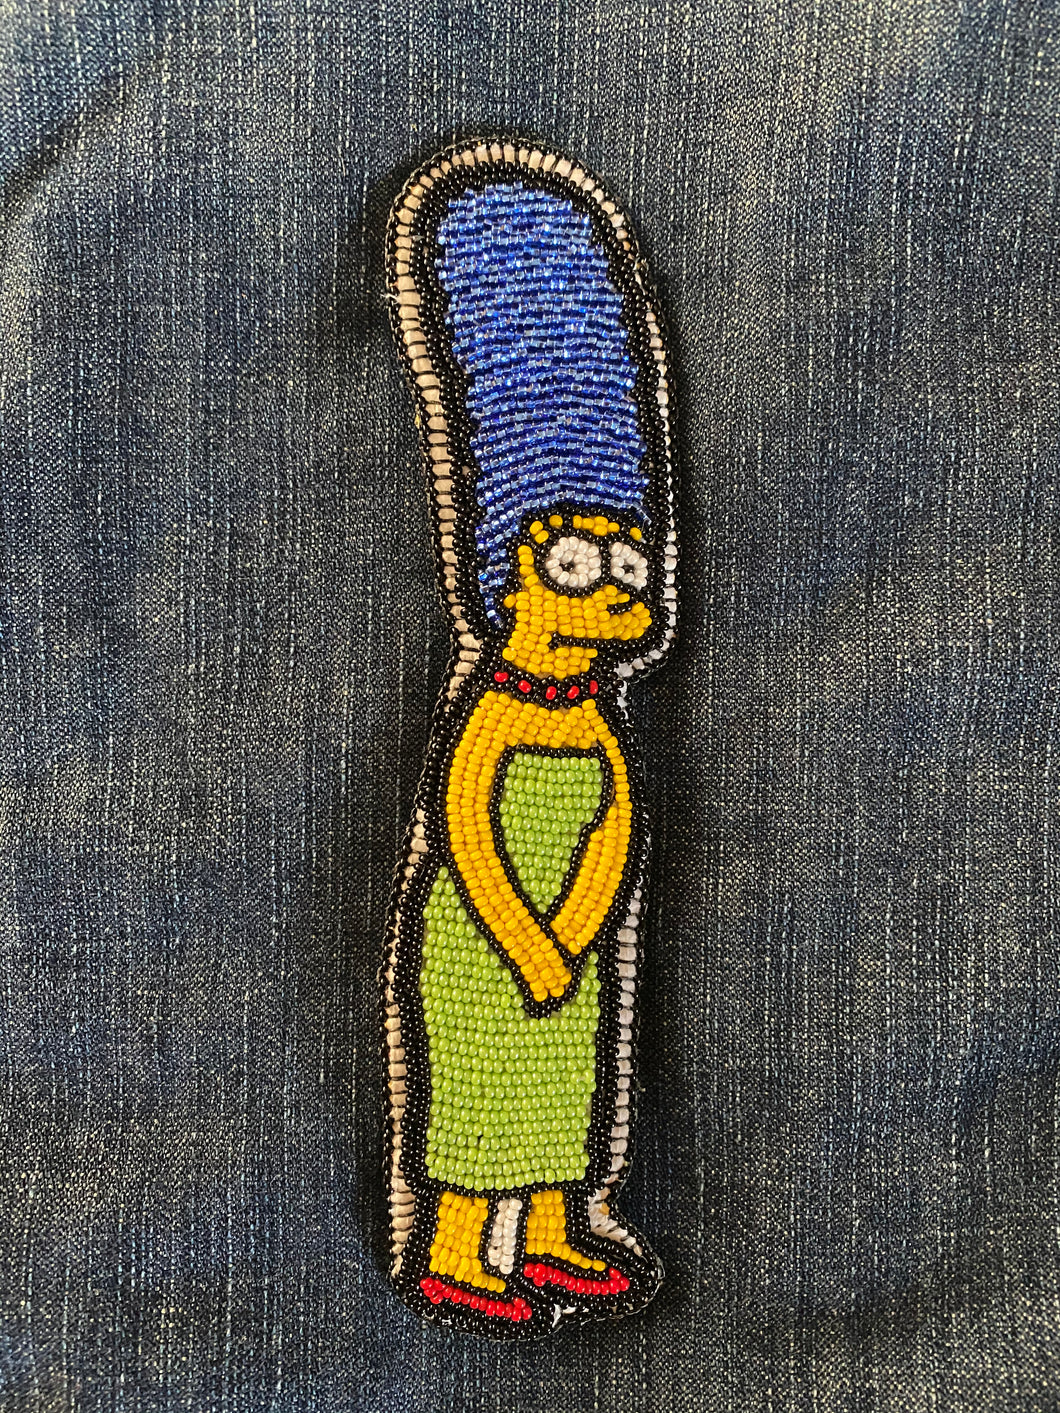 Marge Simpson beaded patch